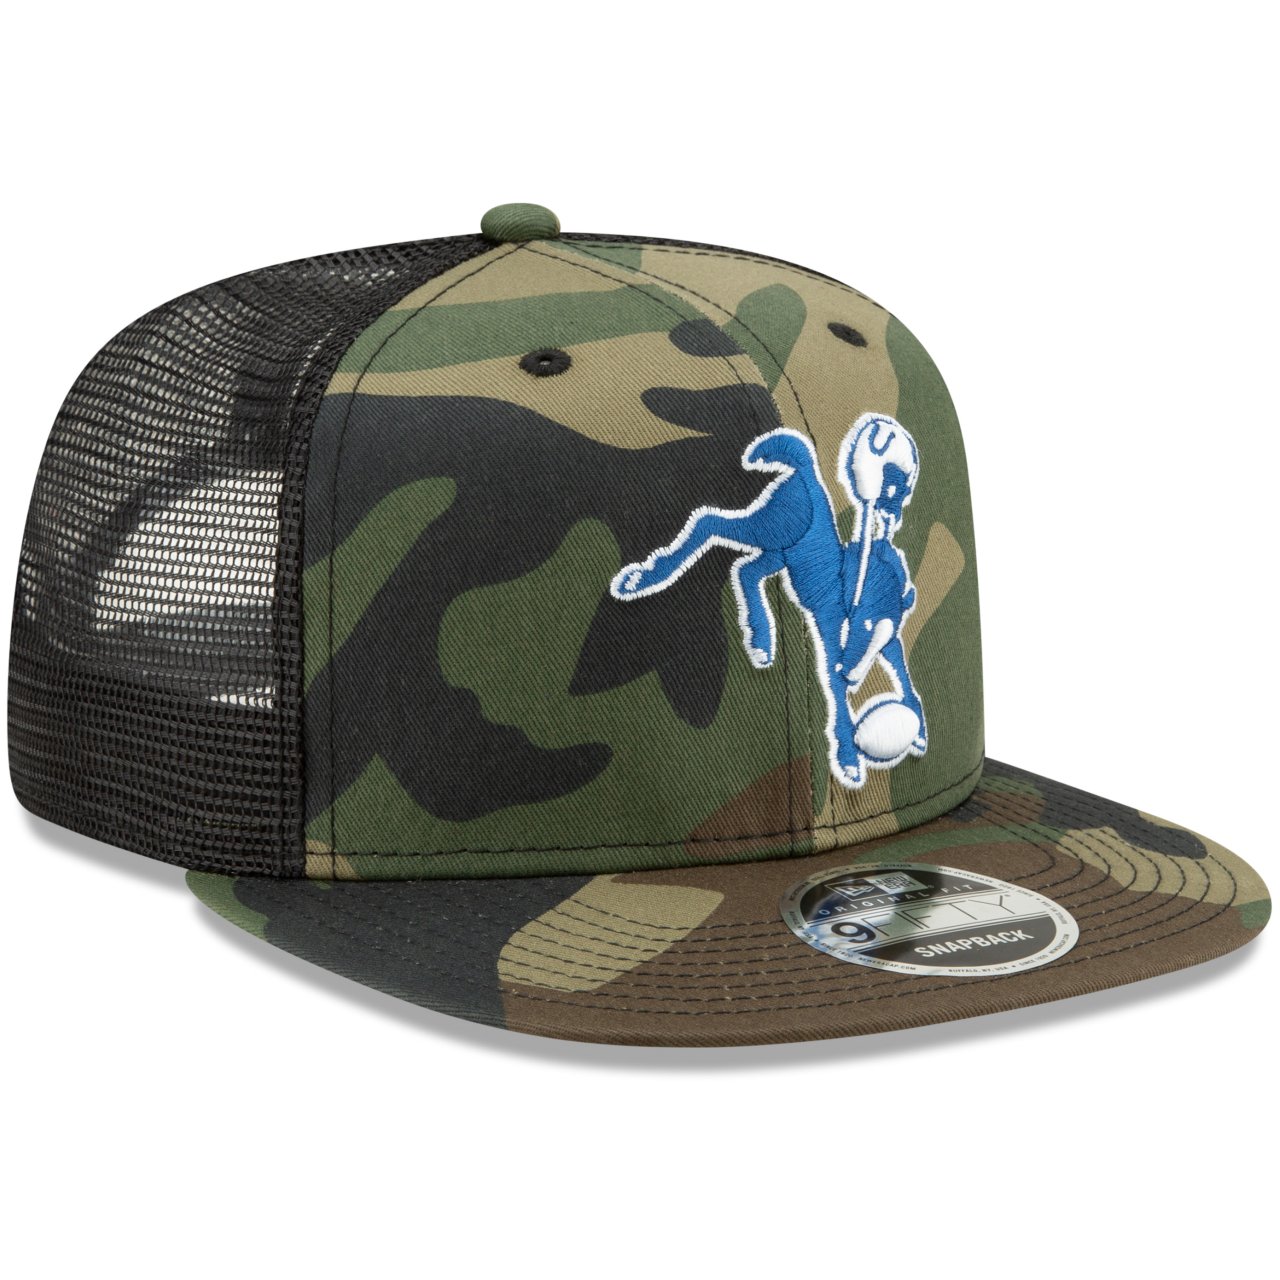 Throwback Baltimore Colts Mesh 9Fifty Snapback Cap wood camo 